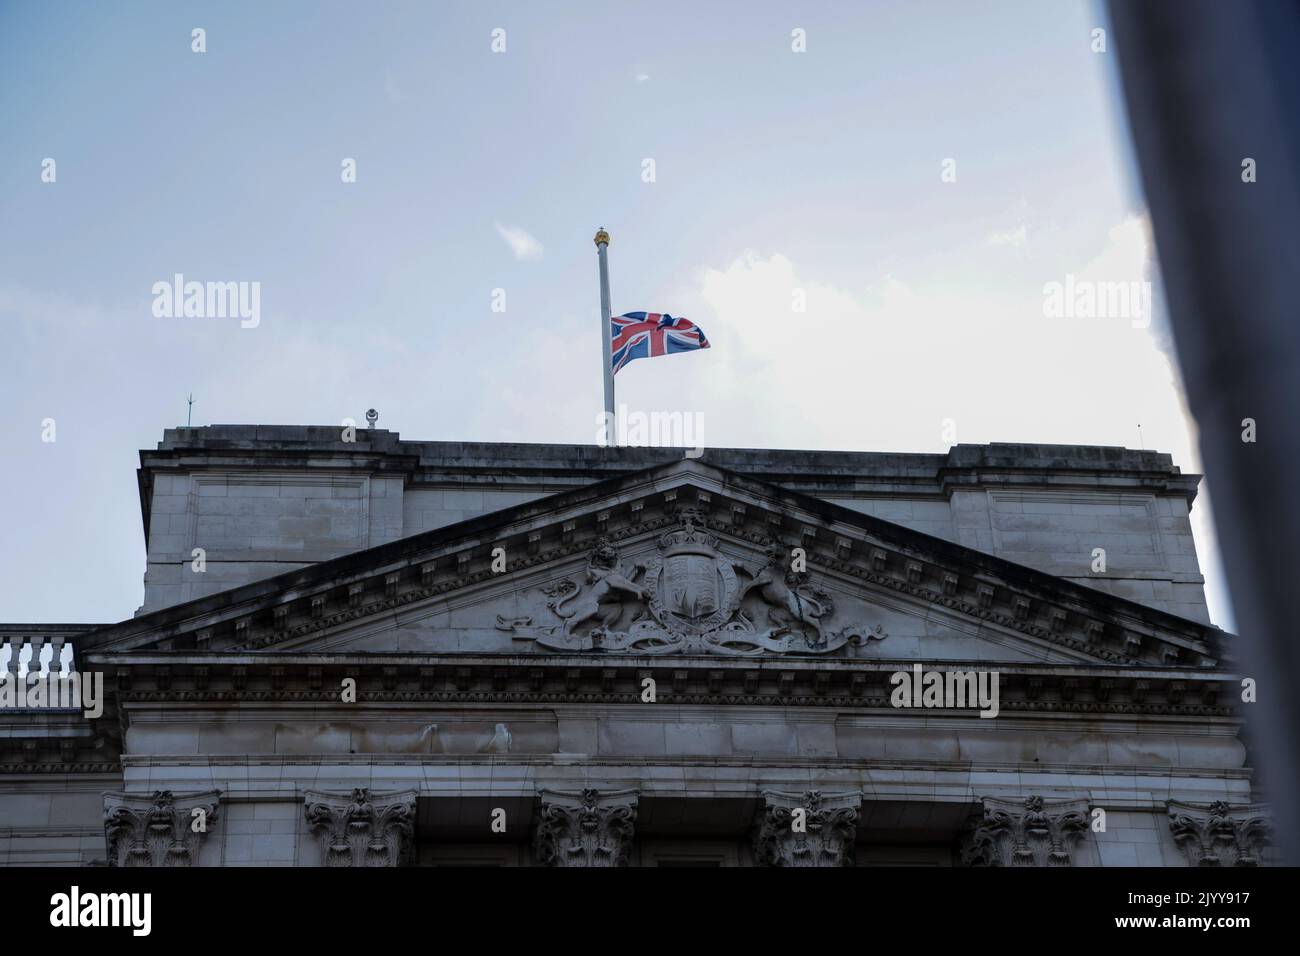 London, UK. 08th Sep, 2022. The Union Jack Flag is flown at half mast at Buckingham Palace as an announcement is made that Queen Elizabeth II, the UK's longest-reigning monarch, has died at the age of 96; She died peacefully at Balmoral Castle in Scotland. Credit: SOPA Images Limited/Alamy Live News Stock Photo